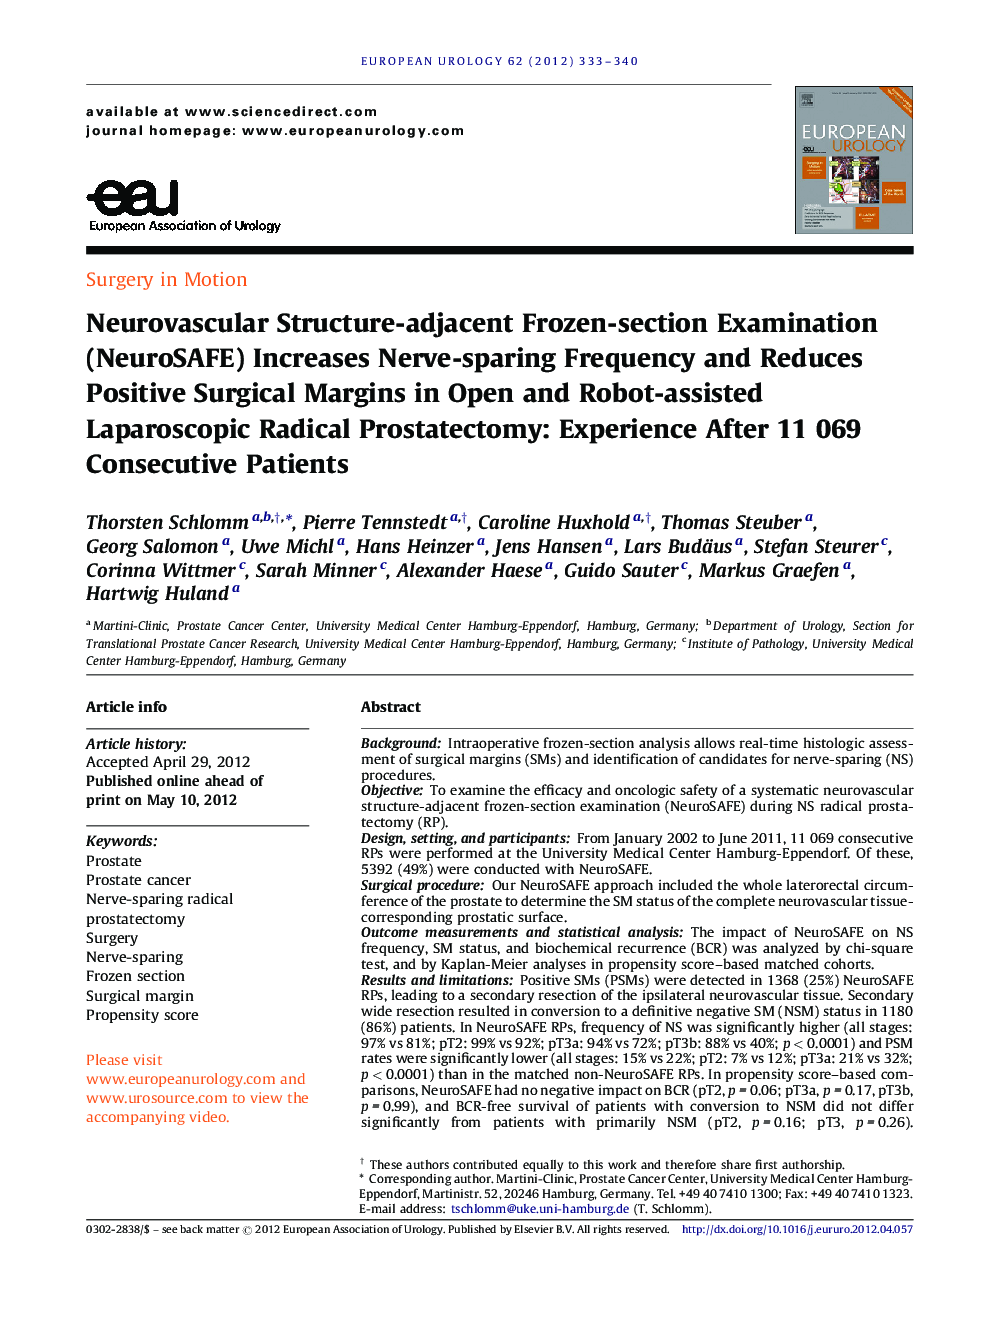 Neurovascular Structure-adjacent Frozen-section Examination (NeuroSAFE) Increases Nerve-sparing Frequency and Reduces Positive Surgical Margins in Open and Robot-assisted Laparoscopic Radical Prostatectomy: Experience After 11 069 Consecutive Patients